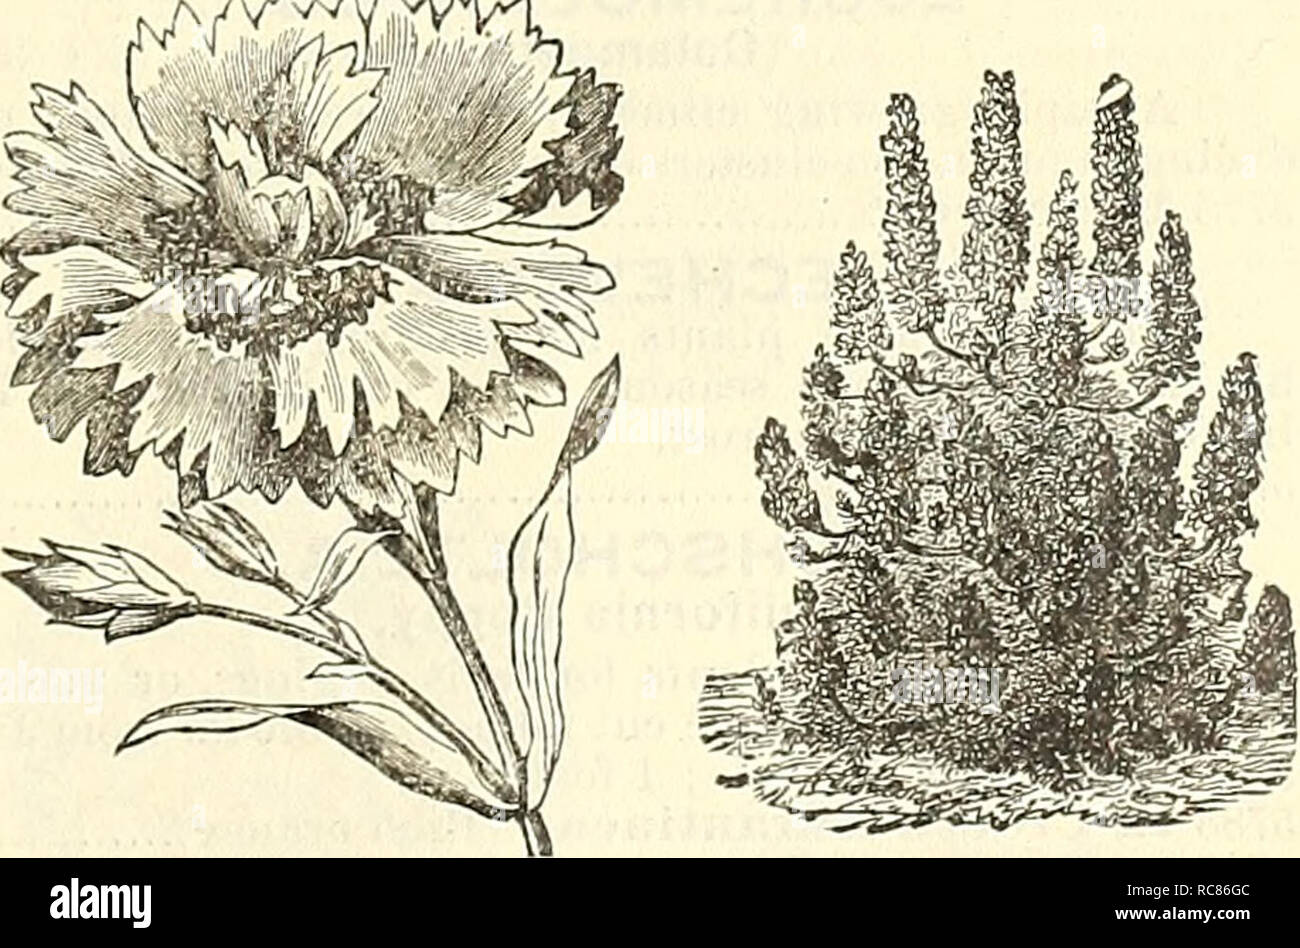 . Dreer's garden calendar for 1887. Seeds Catalogs; Nursery stock Catalogs; Gardening Catalogs; Flowers Seeds Catalogs. Daisy. Datura. 5697 D. Hunnutis Flava Flore Pleno. Large dou- ble flowers, of a deep golden yellow ; delightfully fragrant 5 5700 — Fastuosa Huberiana, Mixed. From large double flowers of various colors 10 5698 — Wrighti (Meteloides). Large single trumpet- shaped flowers, white, with a lilac border 5 5696 — Arborea Simplex (Brugmansia). Large sin- gle trumpet-shaped, white, fragrant flowers, about 12 inches long. Plant out in May 20 DIANTHUS. (Pinks.) A magnificent genus, emb Stock Photo